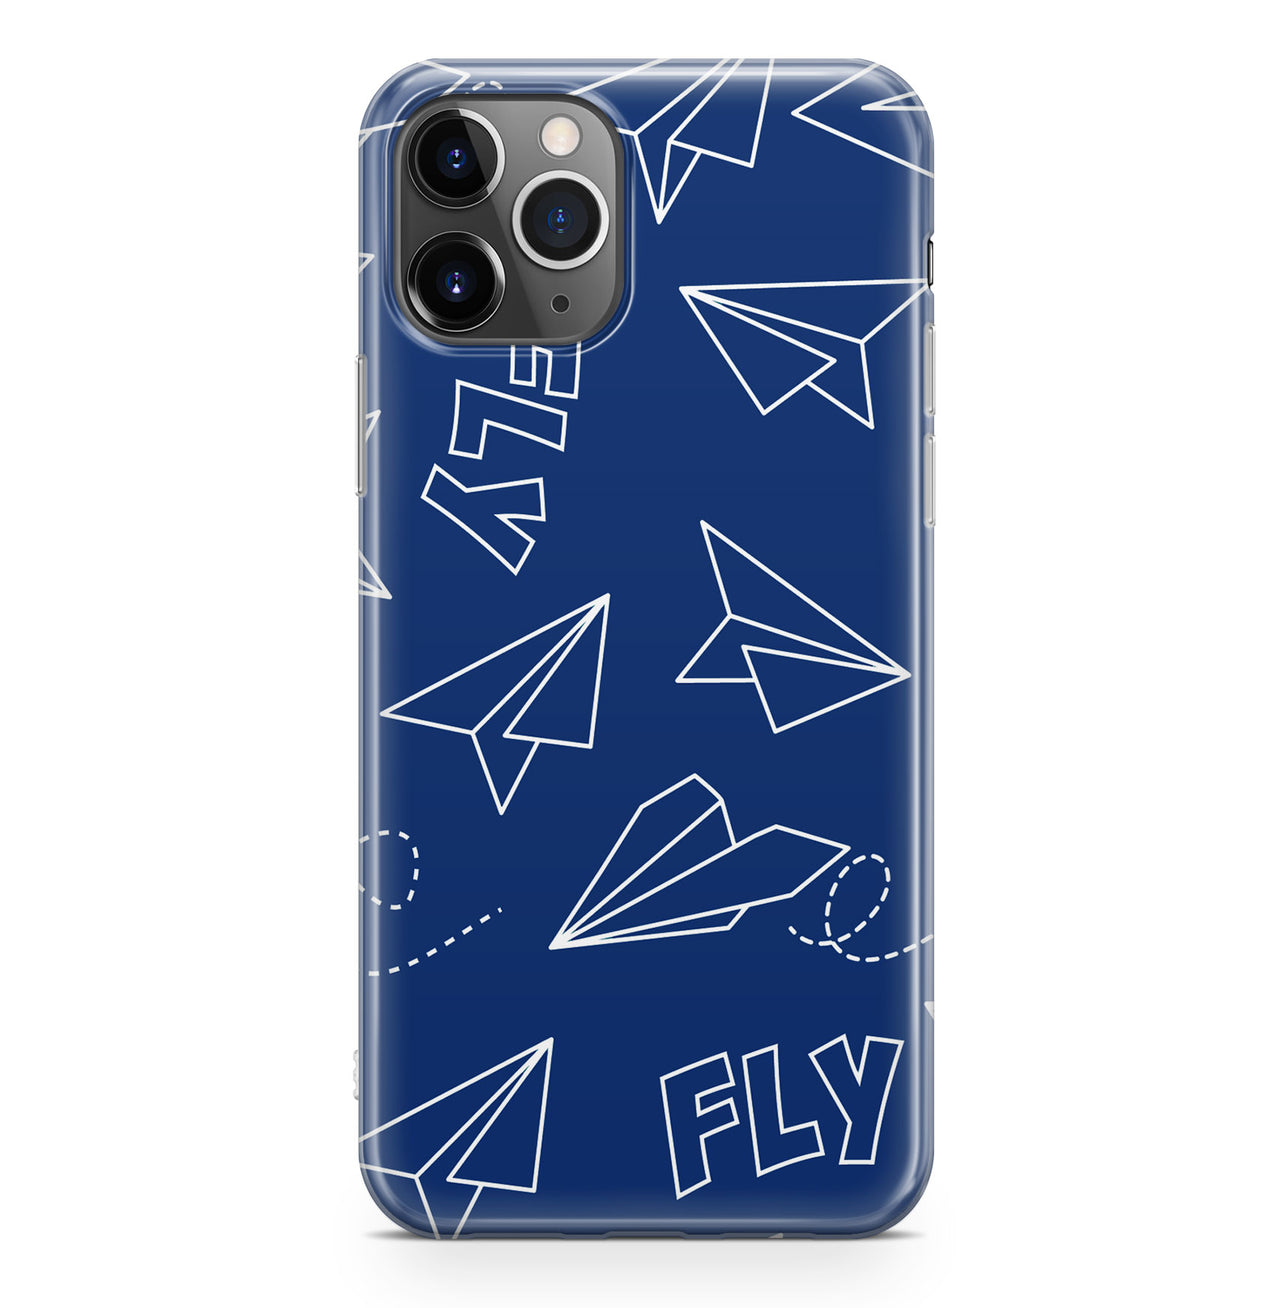 Paper Airplane & Fly-Blue Designed iPhone Cases